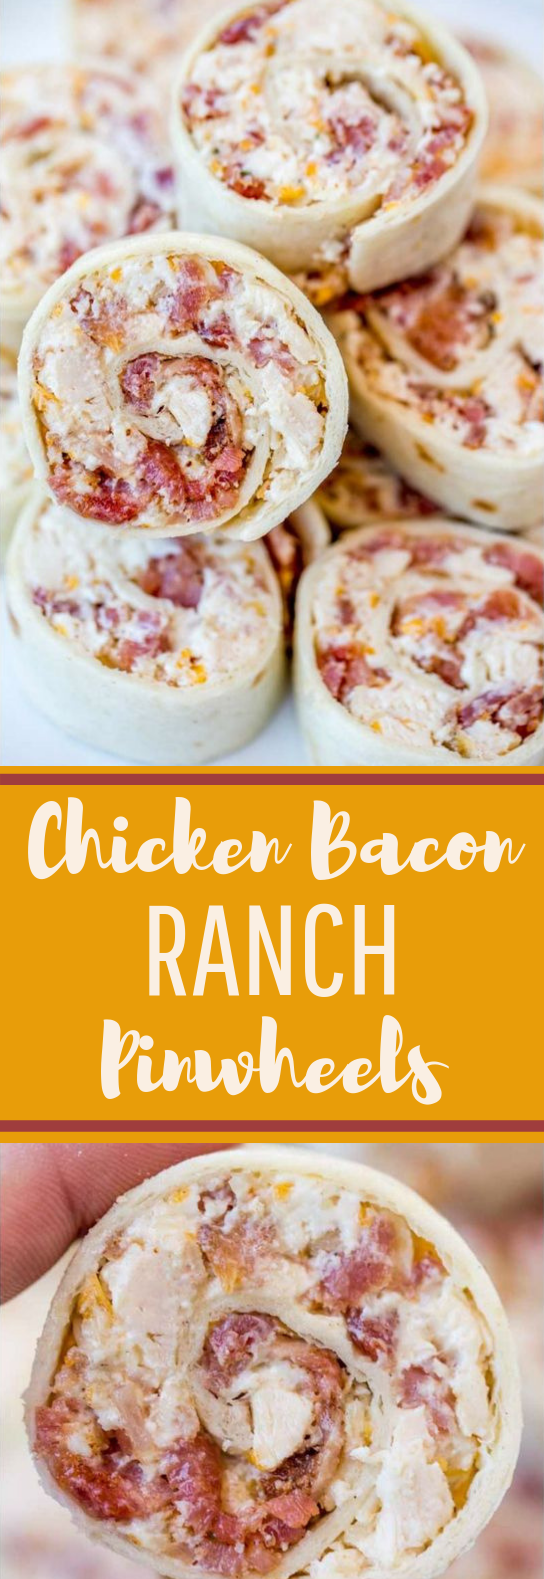 Chicken Bacon Ranch Pinwheels #appetizer #partyfood